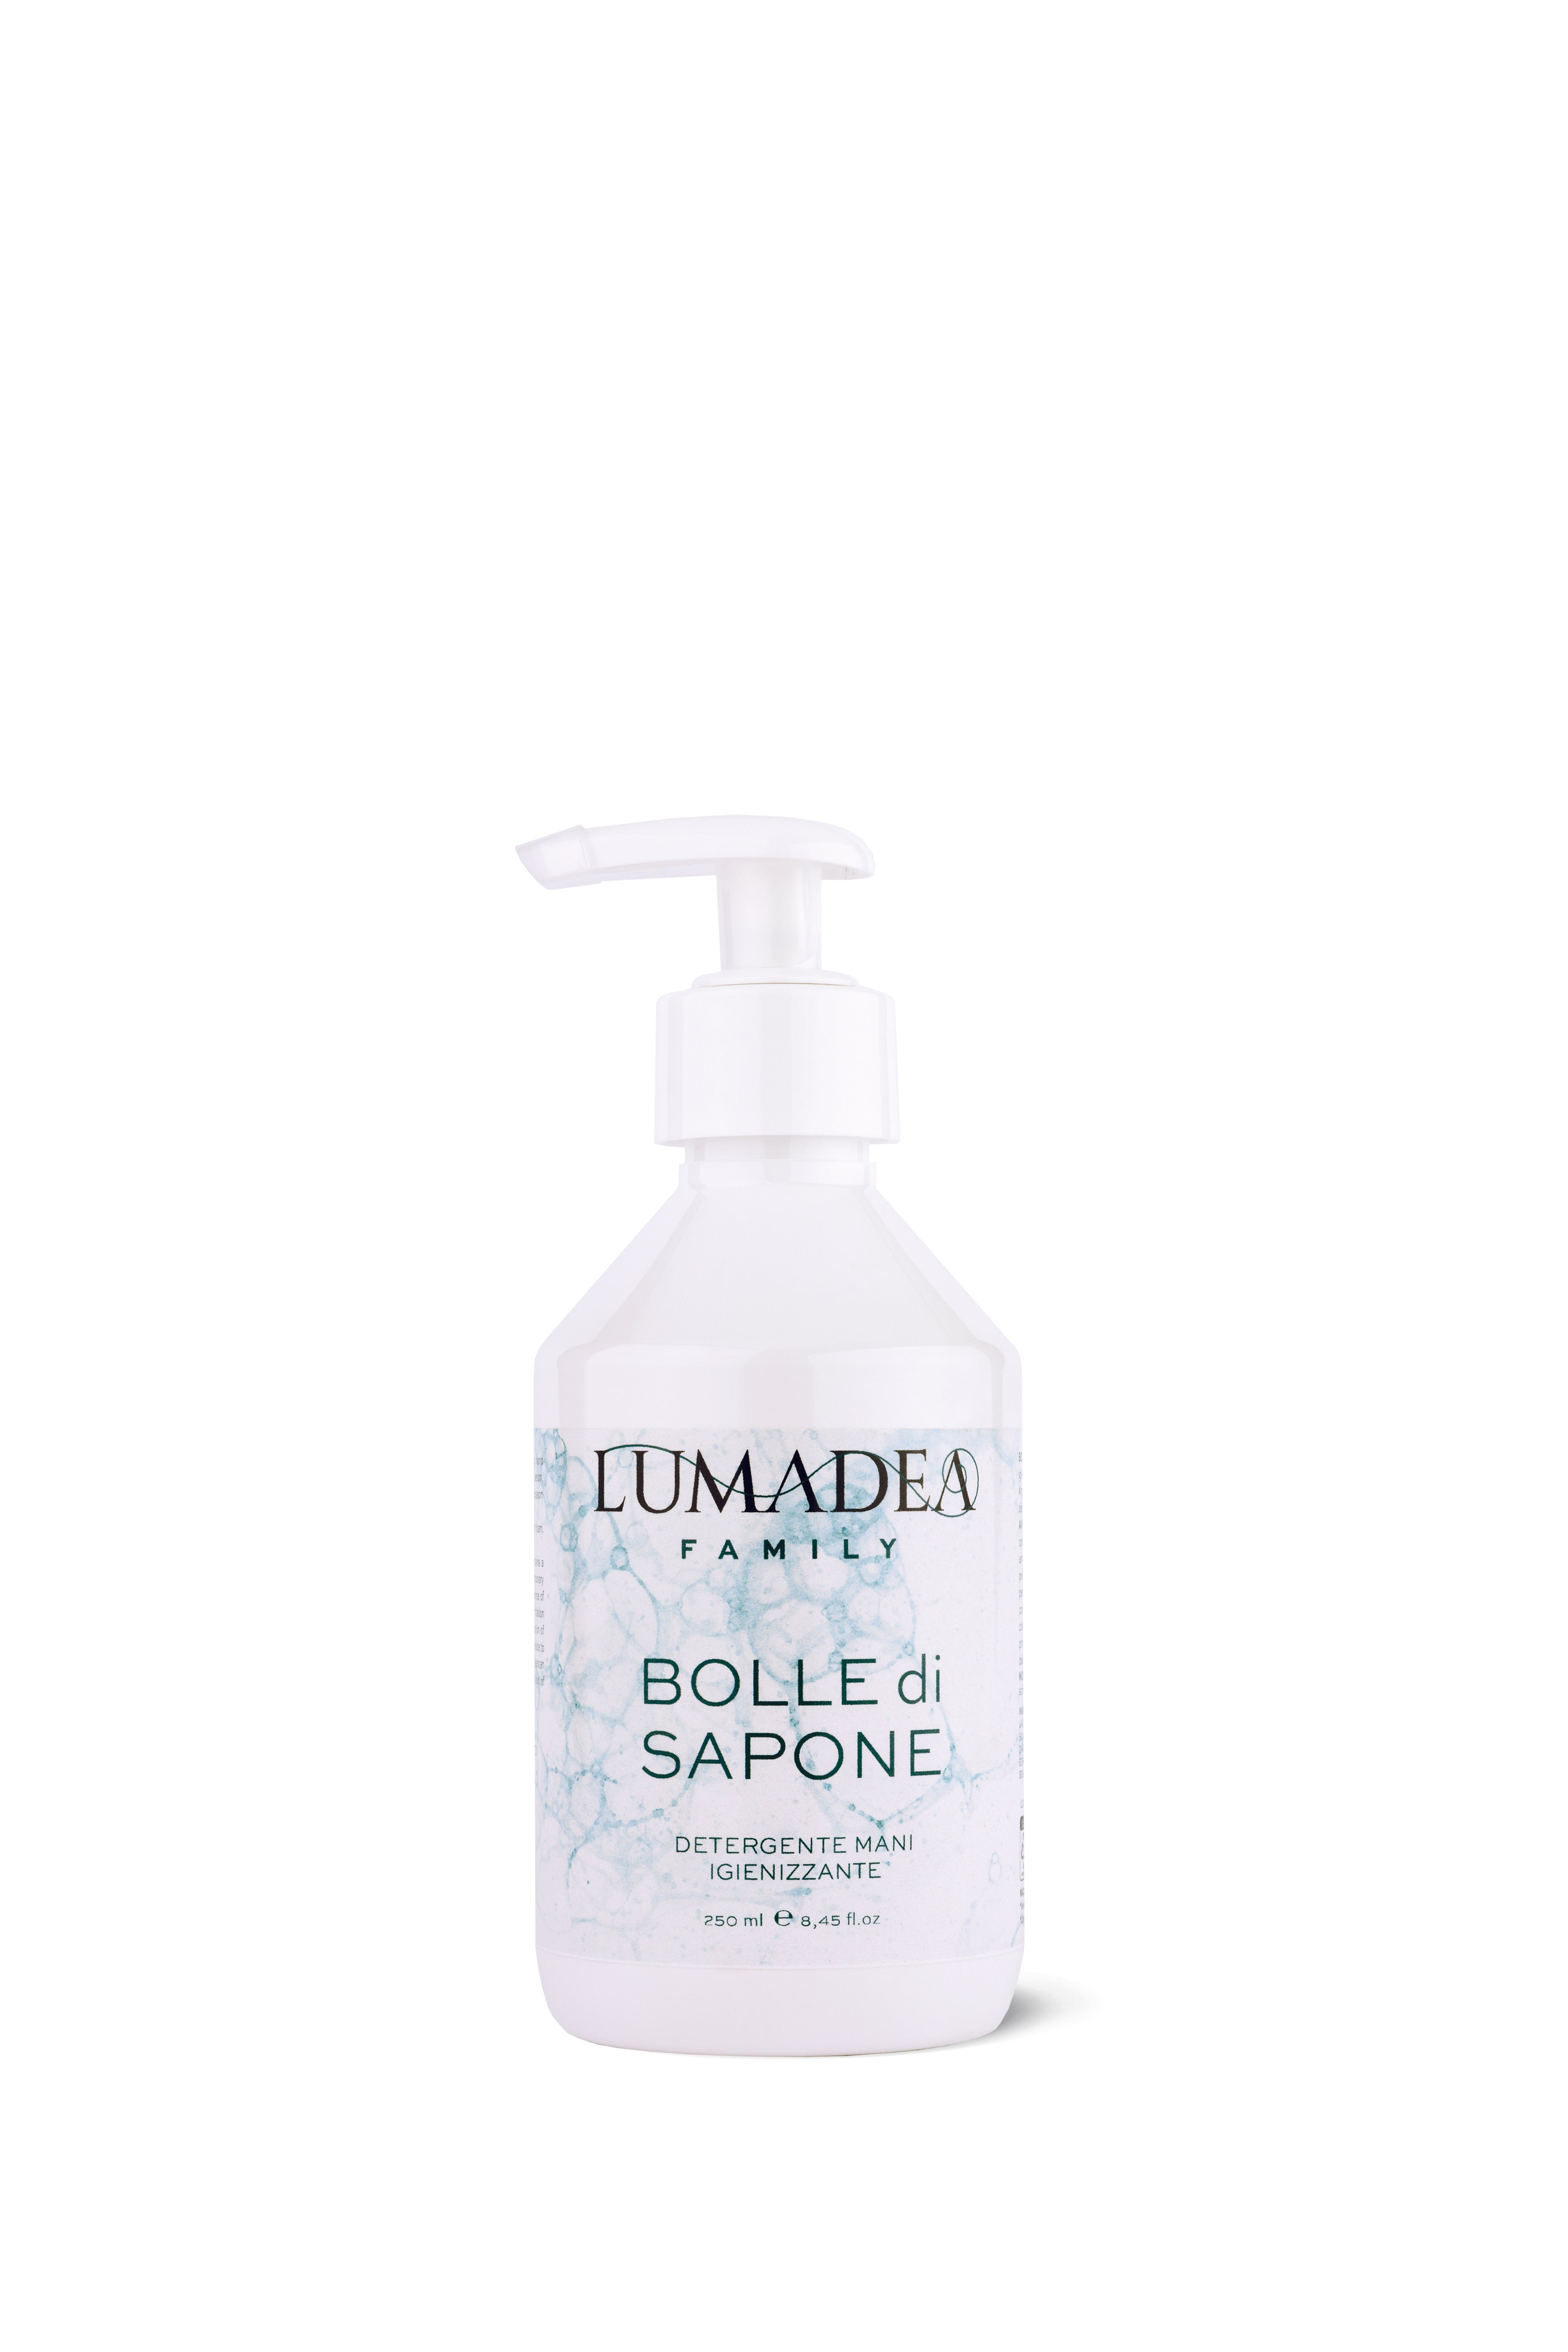 SOAP BUBBLES | SANITIZING HAND CLEANER 